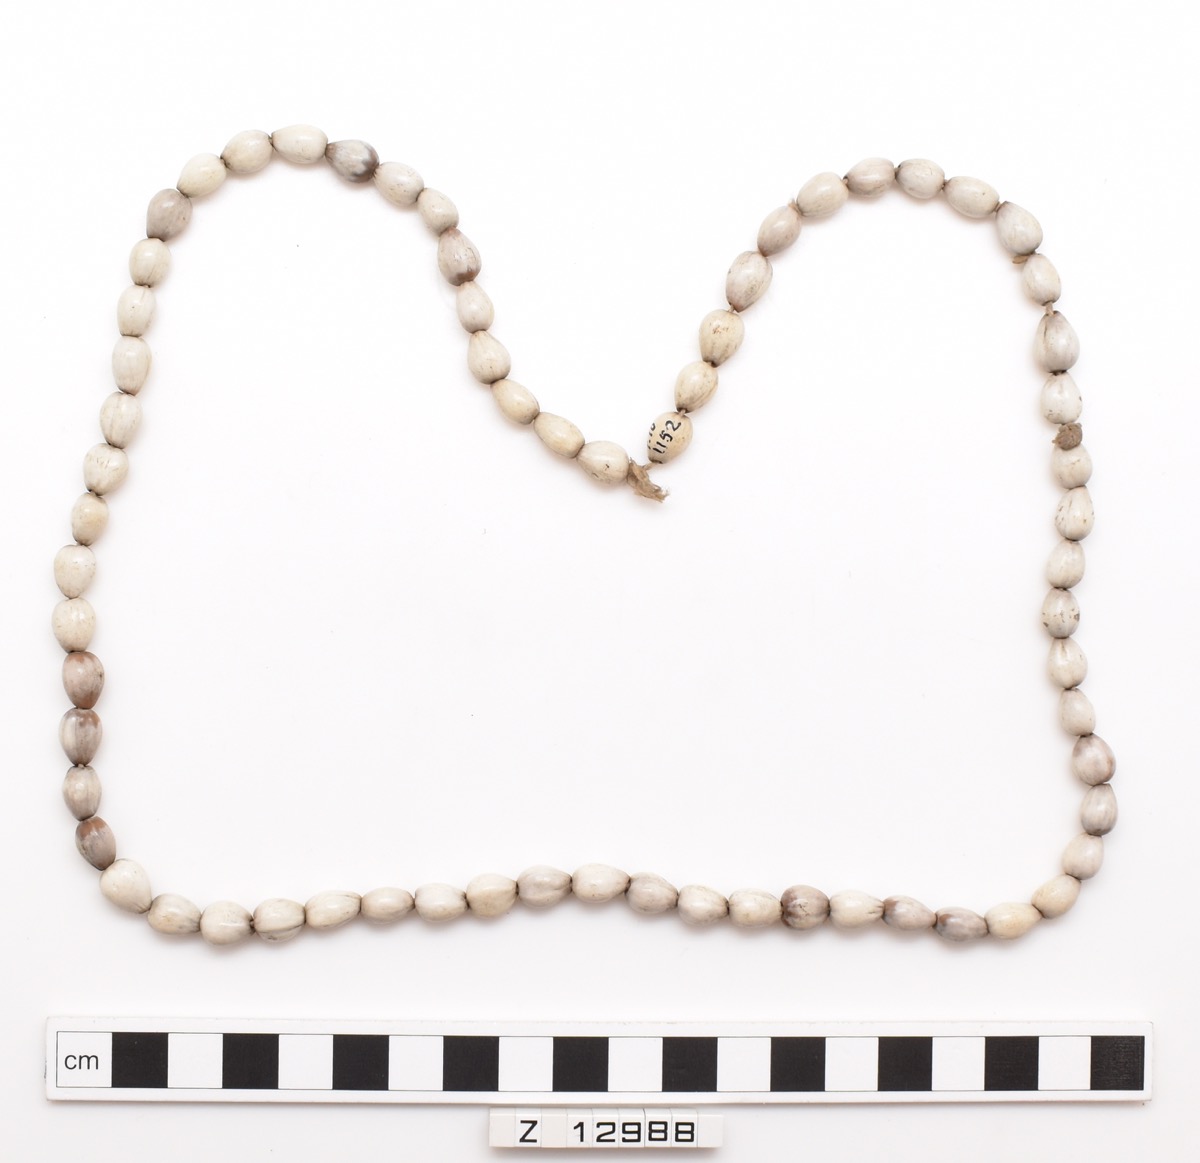 Necklace of cylindrical beads in white or cream colour, strung on cord. No spacing between beads. Medium - long in length, laid flat in a studio photo